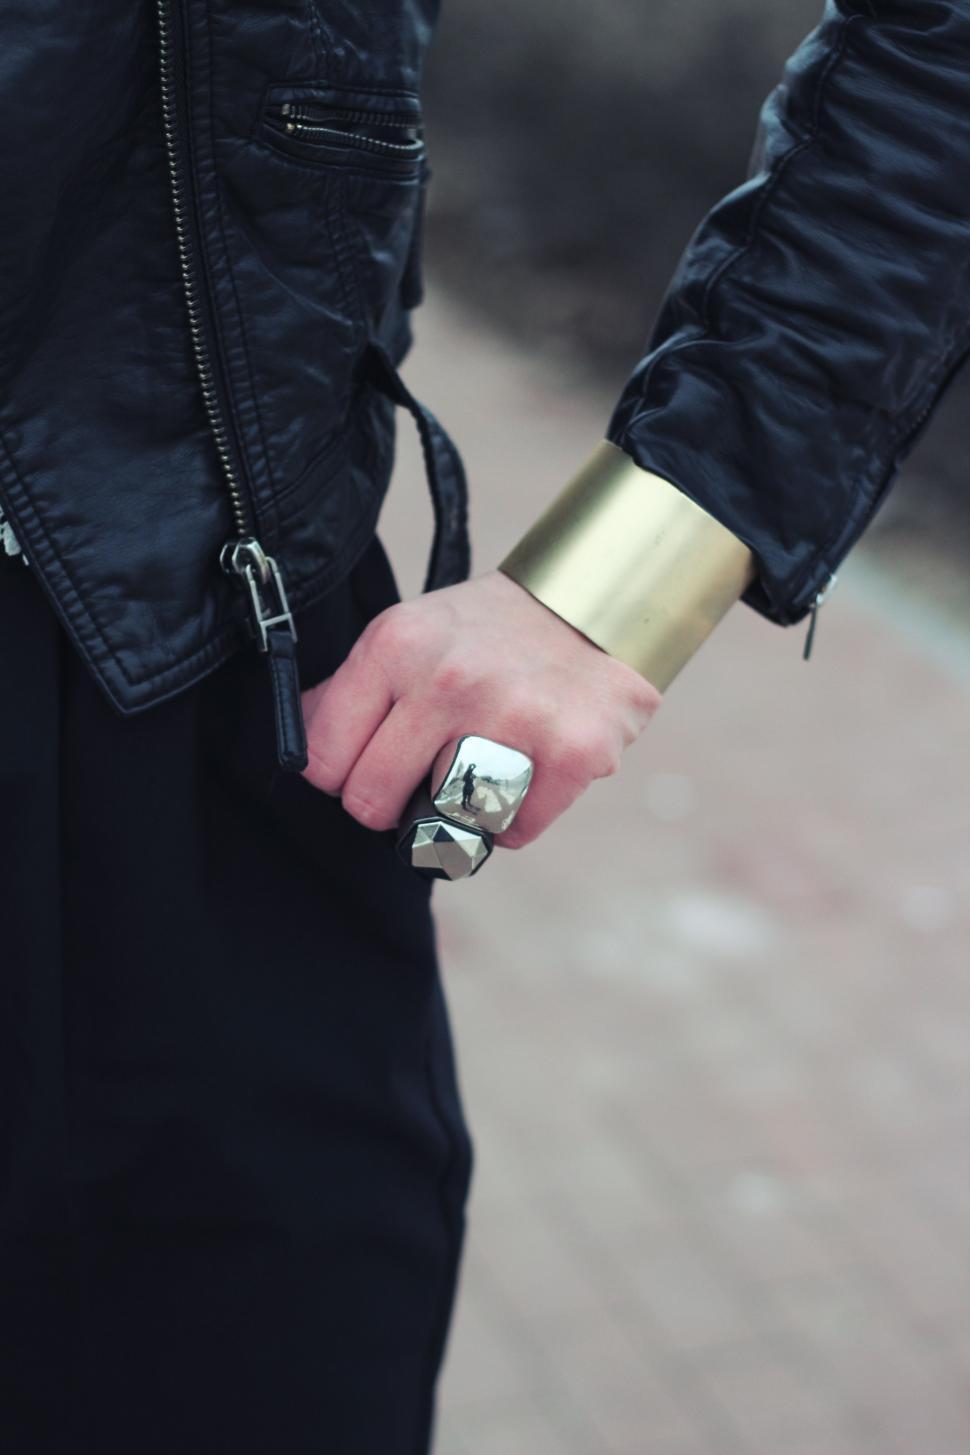 Free Image of Man Holding Silver Object in Black Jacket 